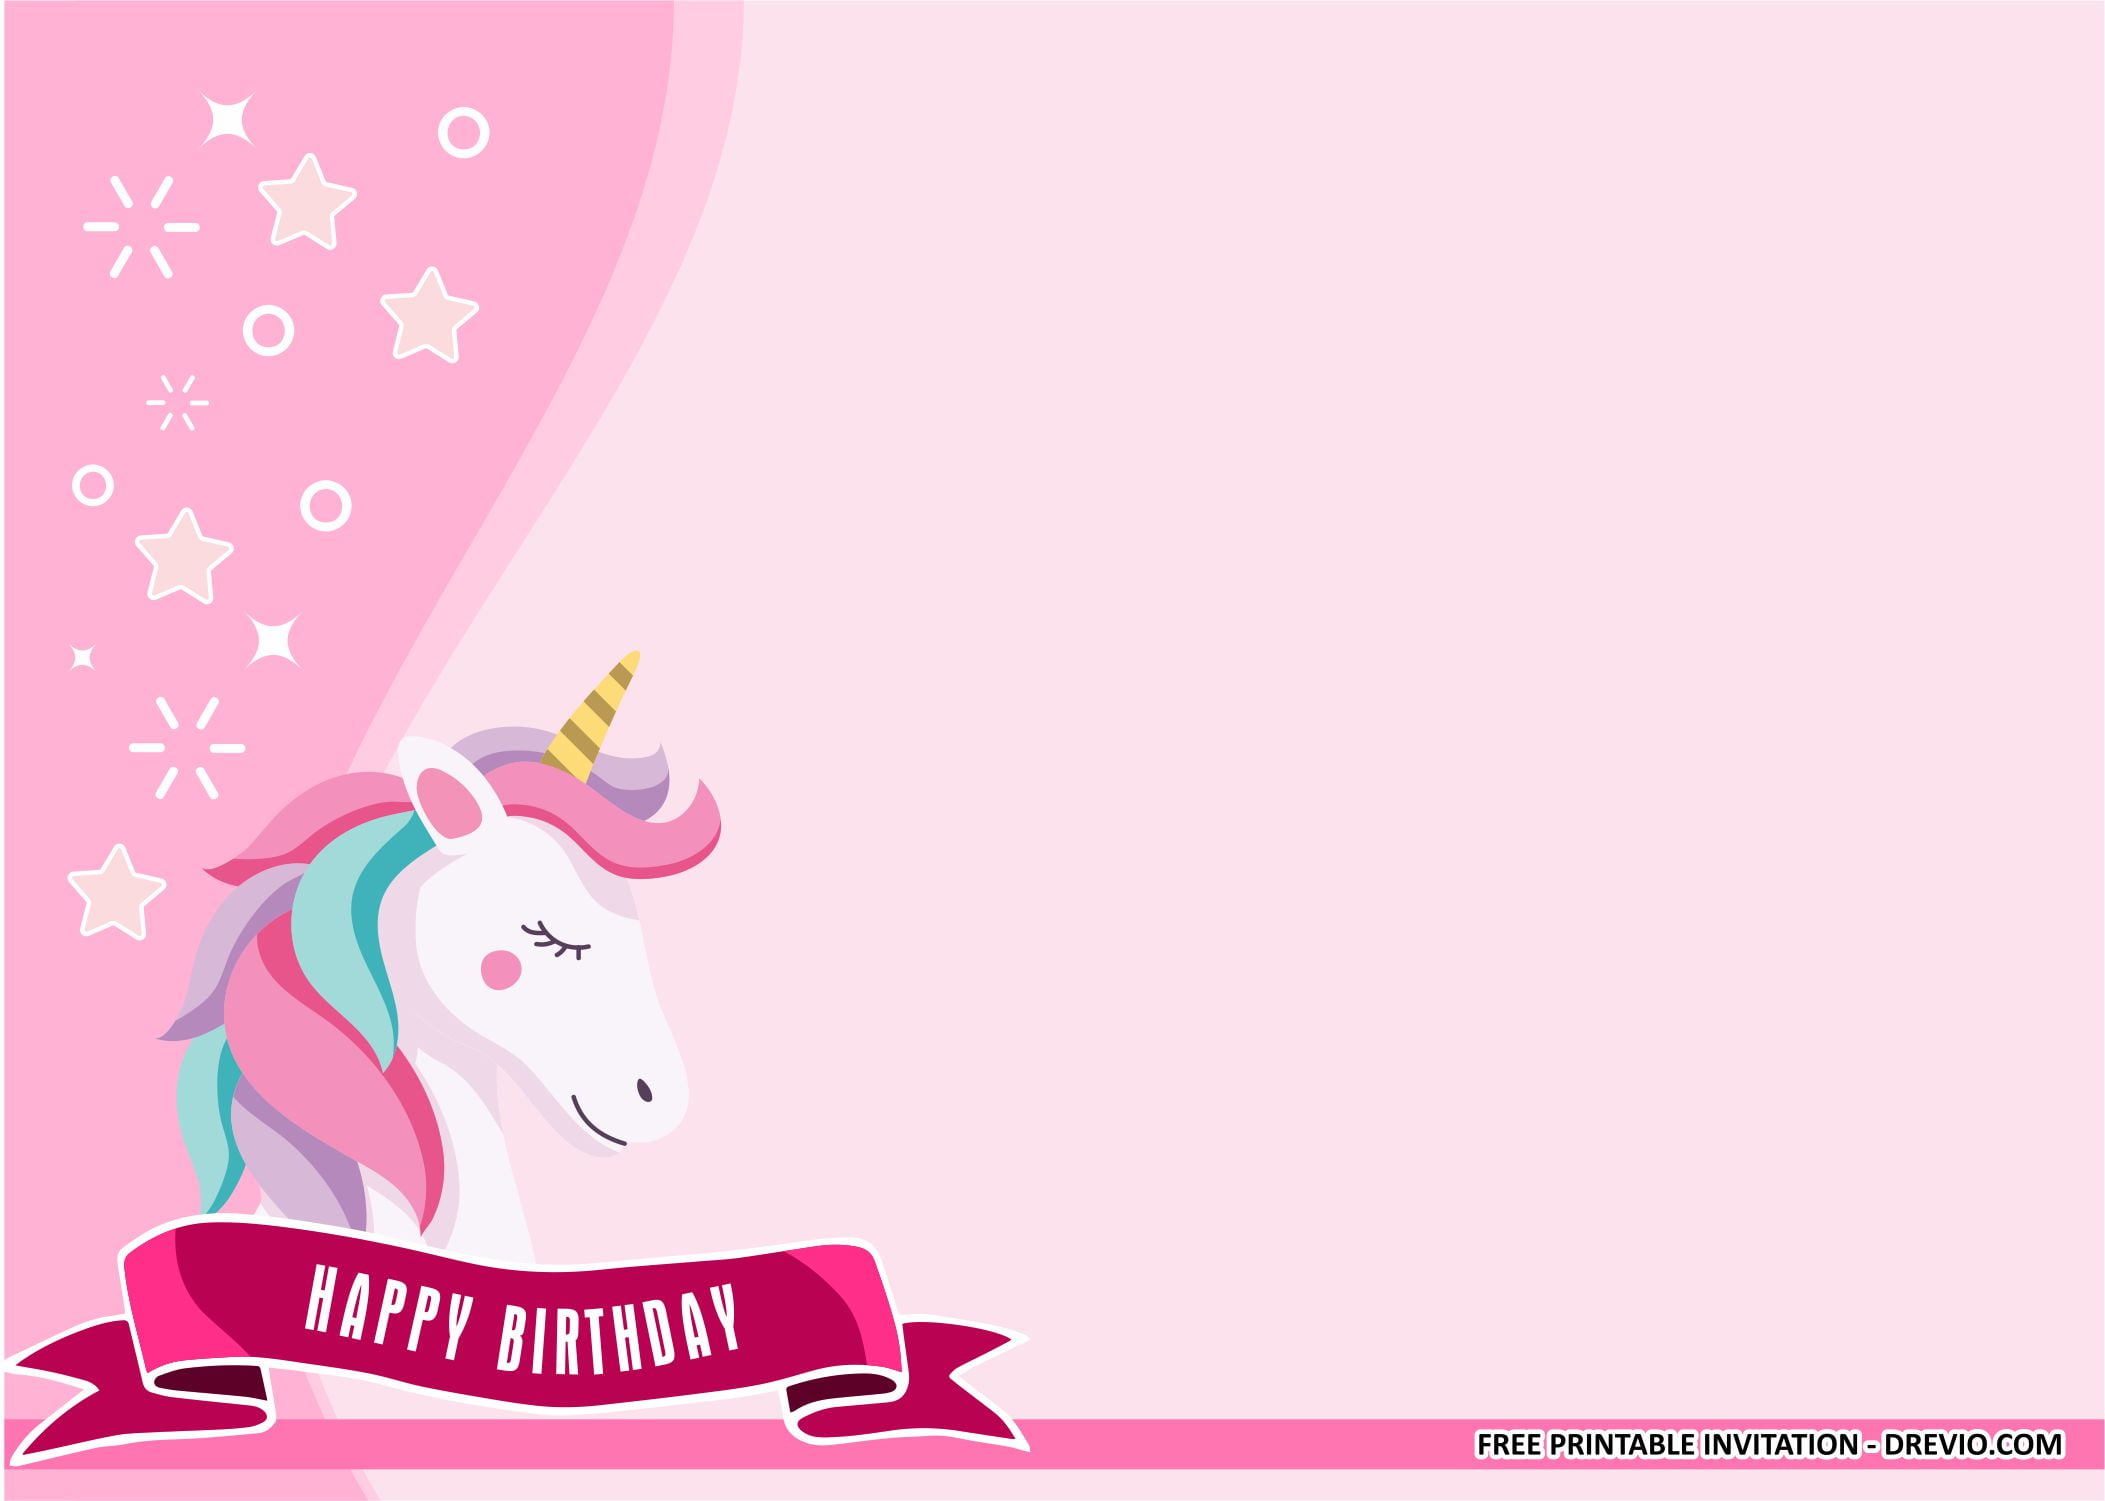  FREE PRINTABLE Golden Unicorn Birthday Party Kits Template Download Hundreds FREE 